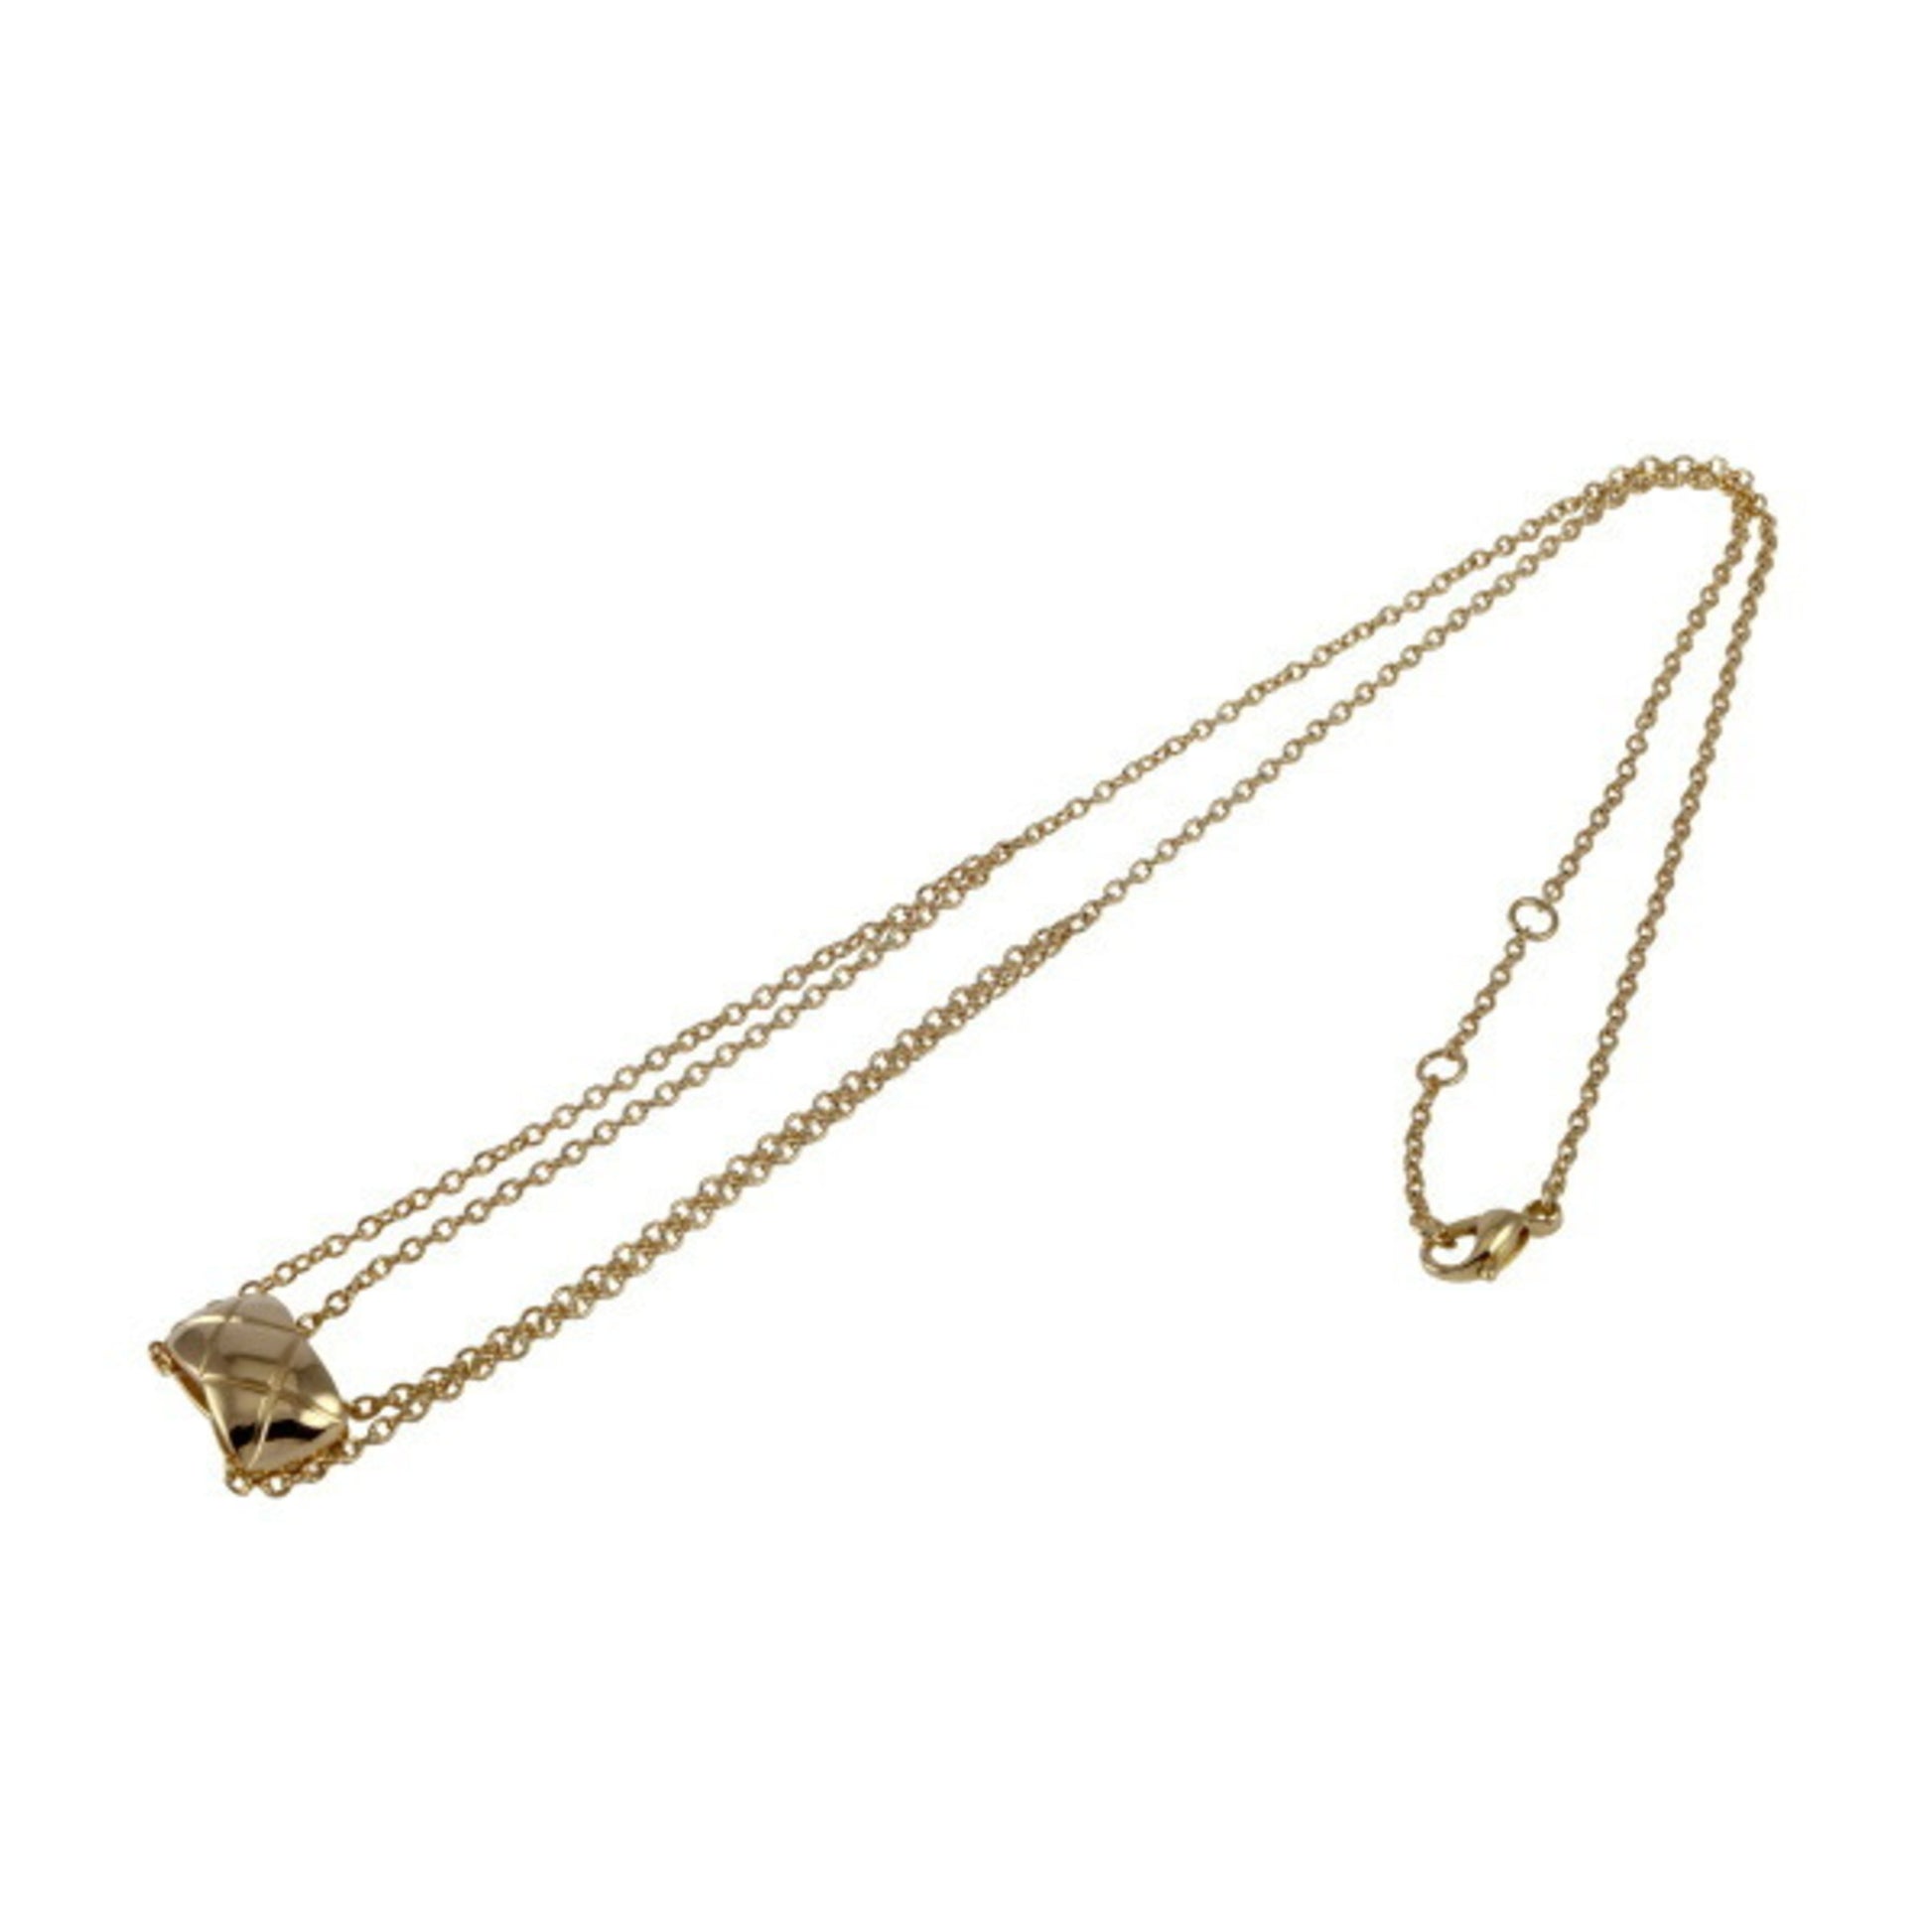 Chanel Coco Crush Necklace J11360, Gold, One Size